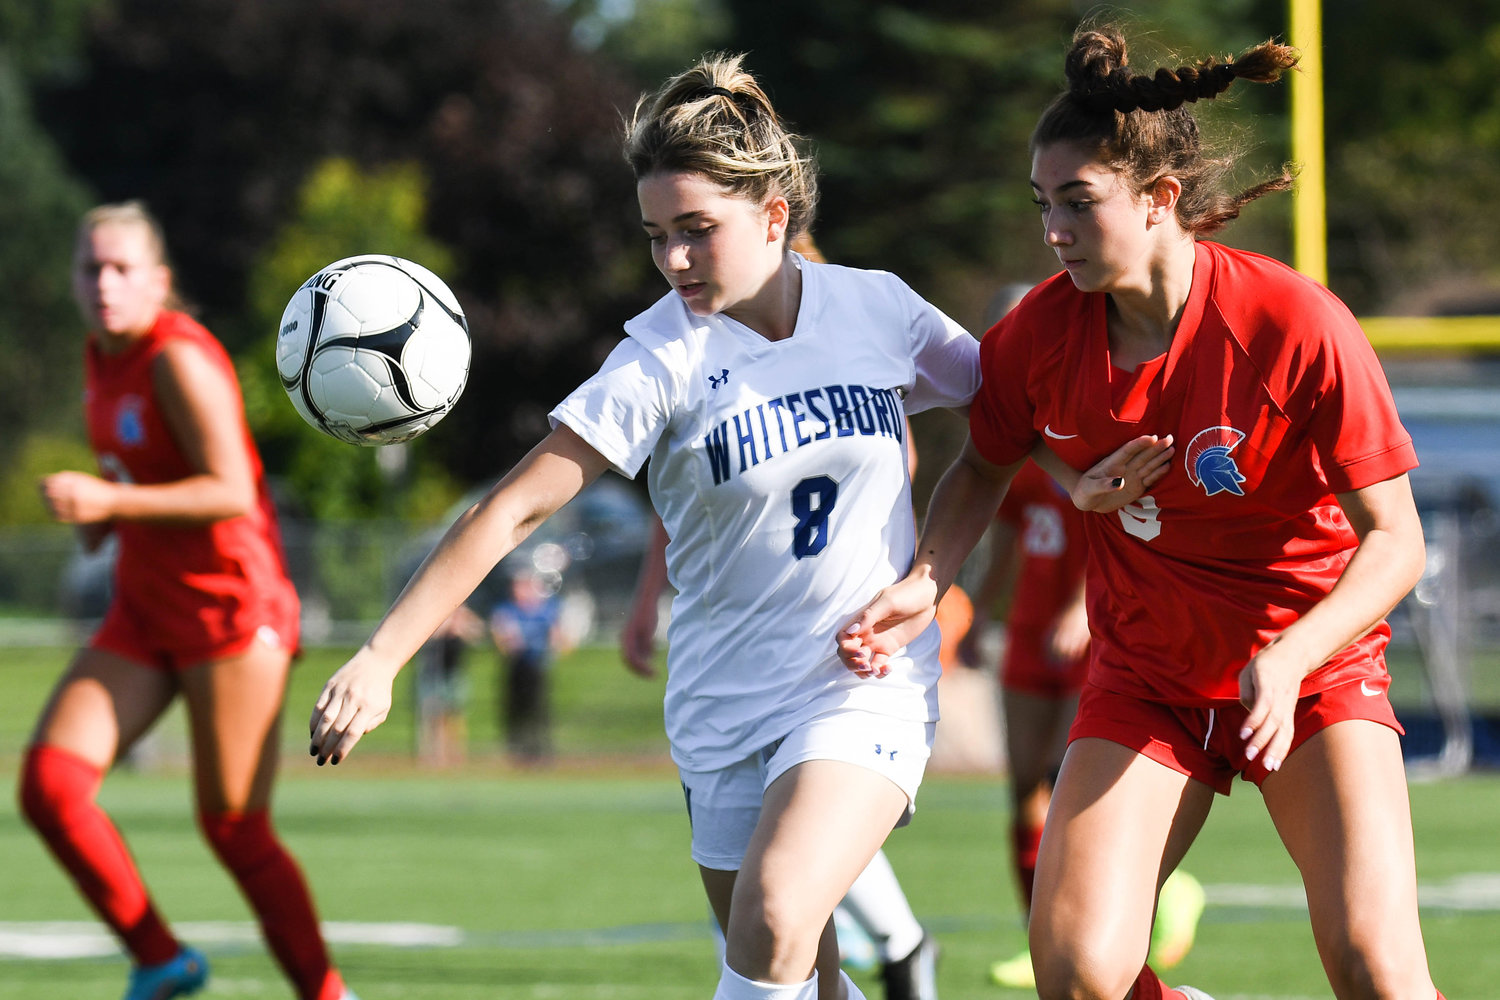 Whitesboro player Ellana Stucchi, left, fights for control of the ball with New Hartford’s Amanda Graziano during the game on Thursday. Graziano scored in the Spartans’ 5-0 win.